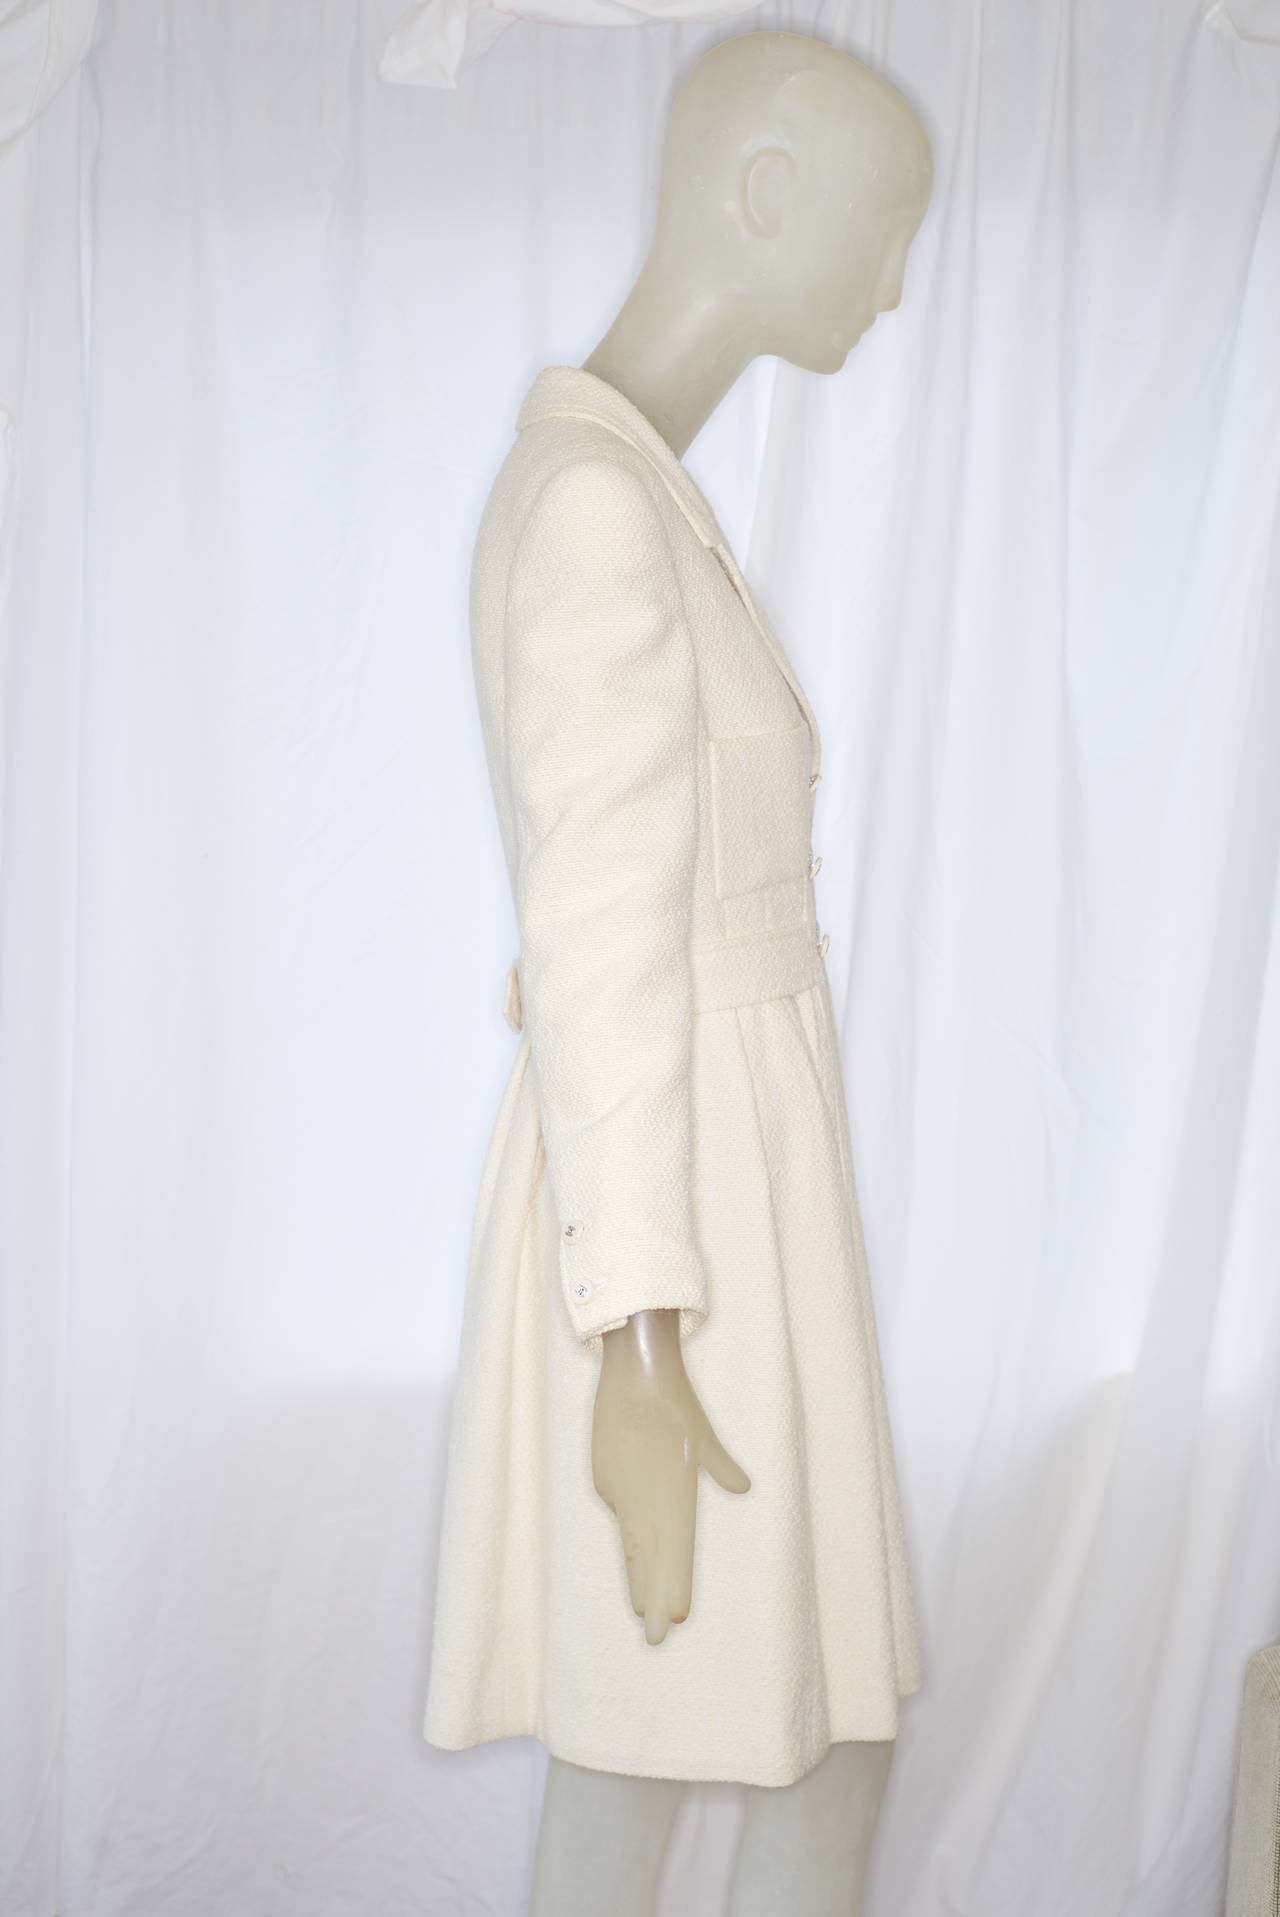 1990s Chanel cream jacket.  Size 40.  Excellent condition.